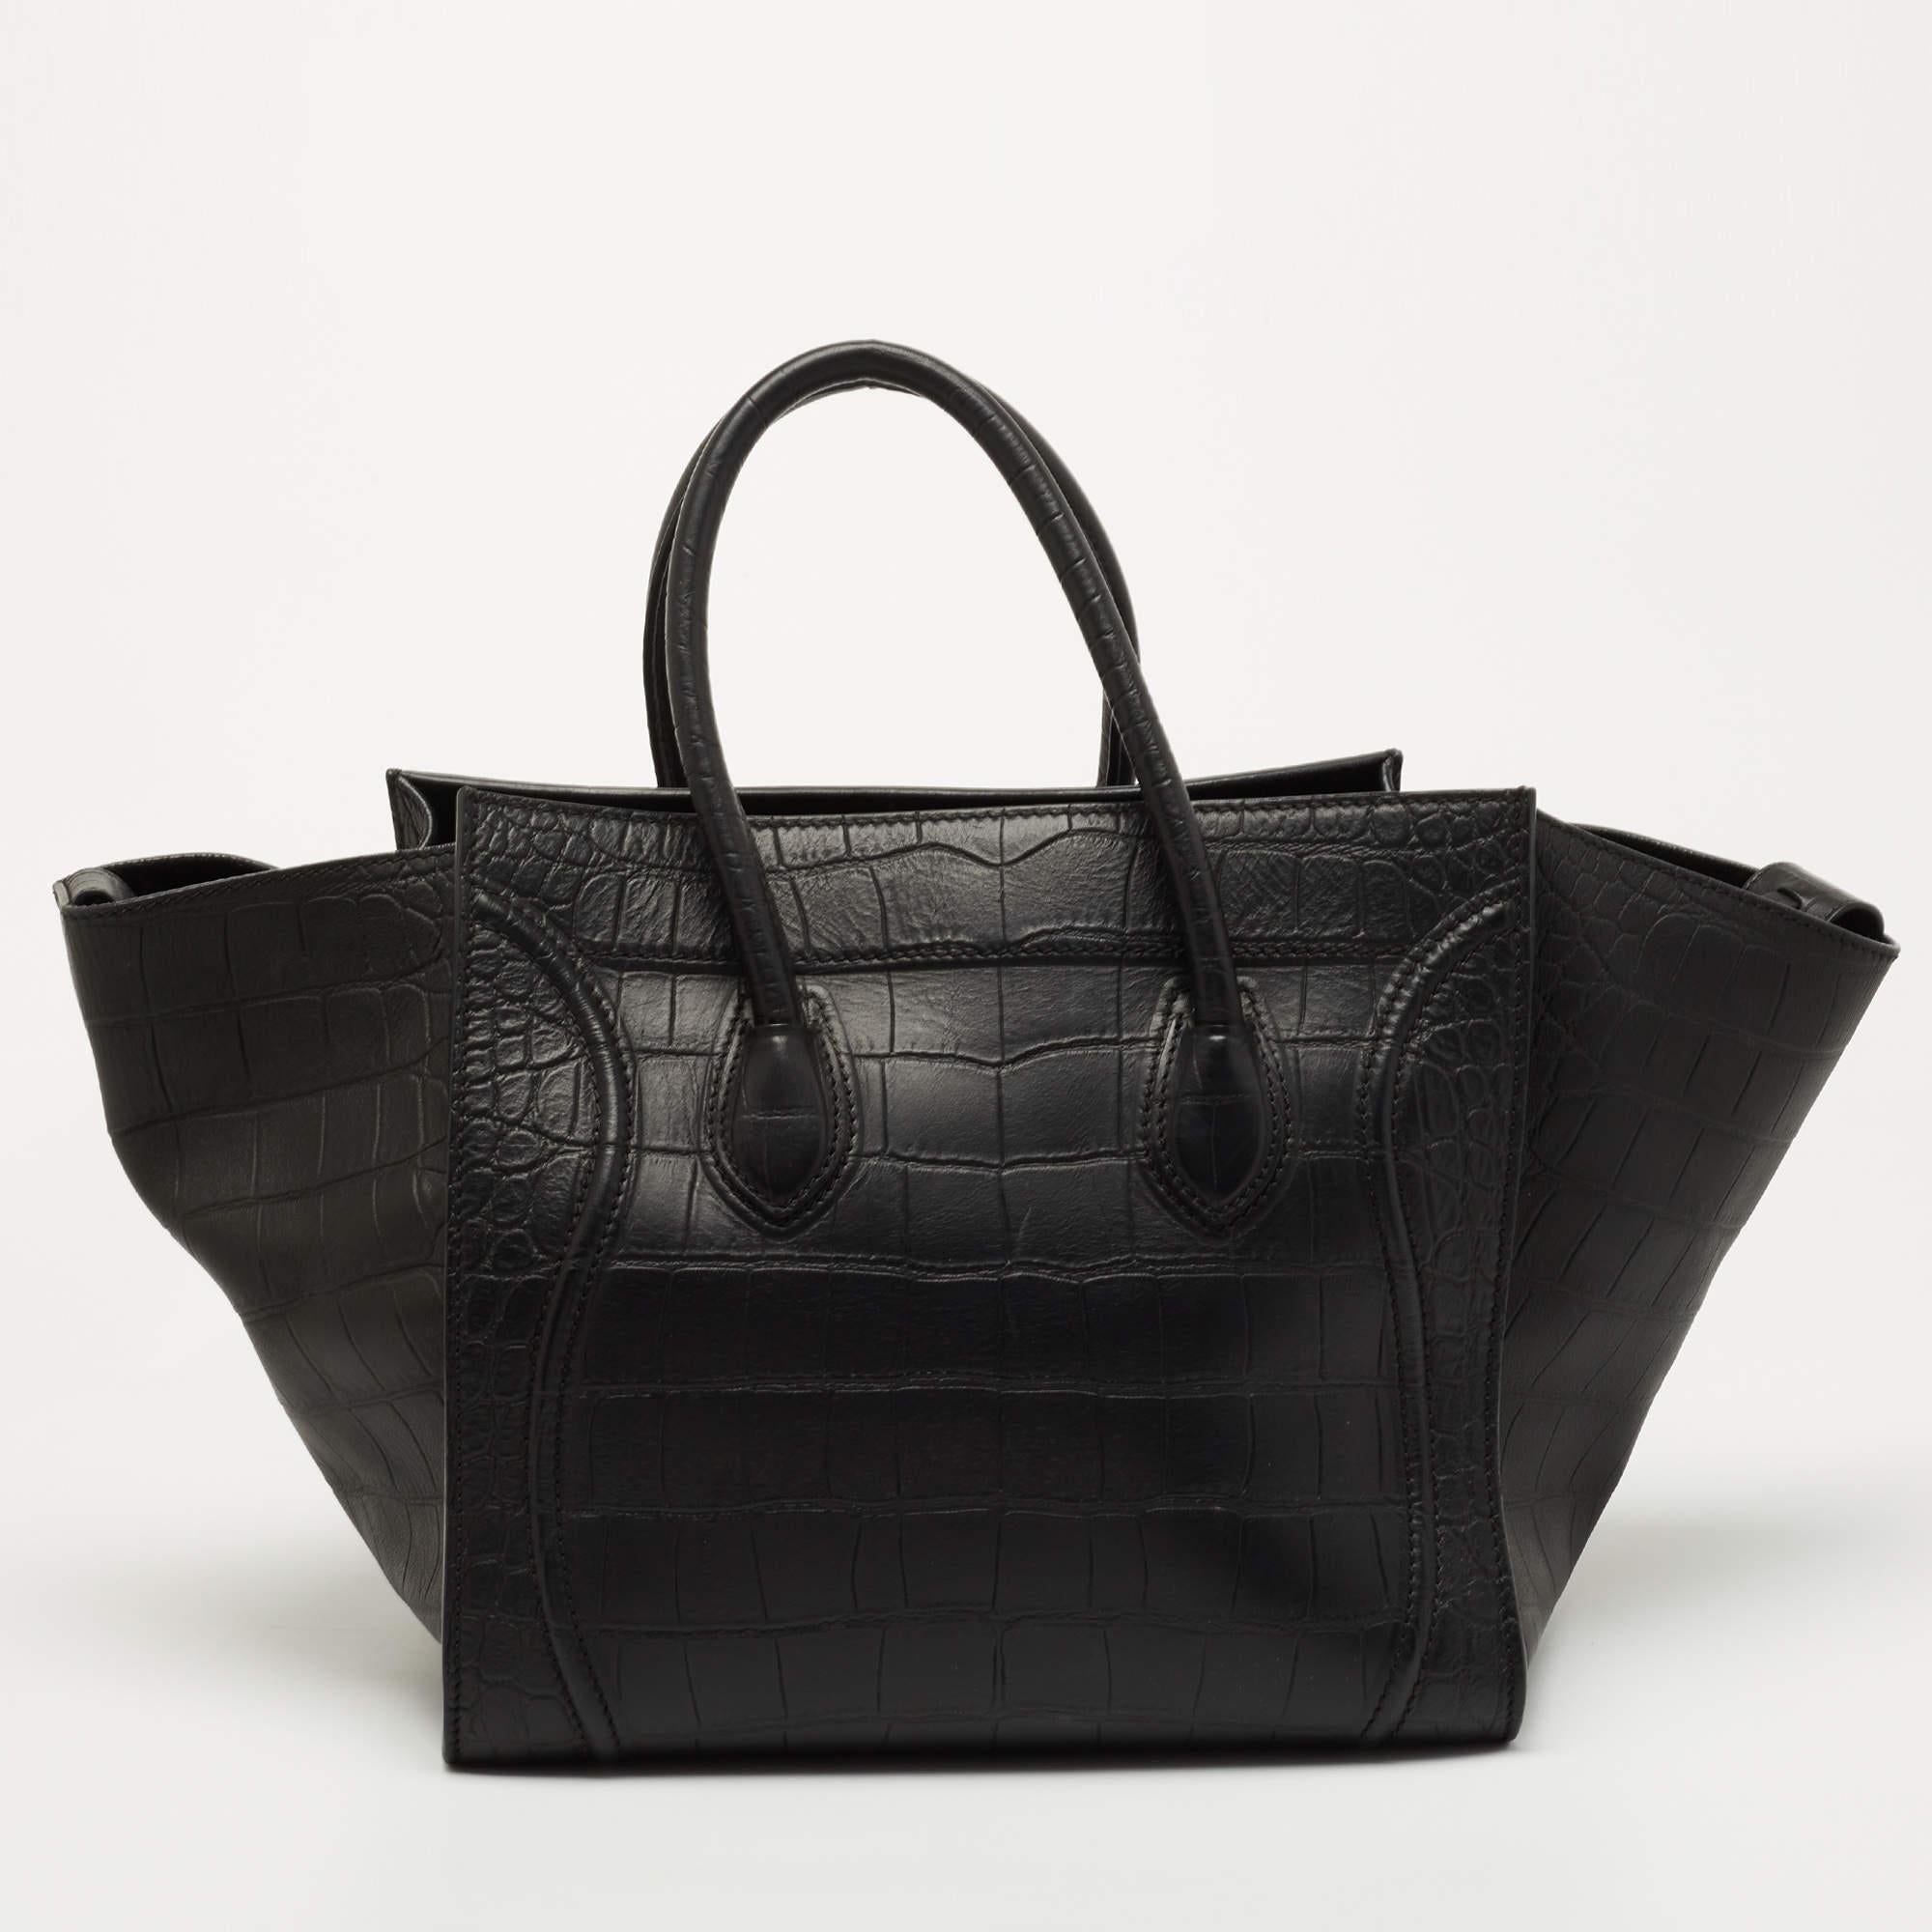 Celine released the Phantom as a newer version of their successful Luggage model. Unlike the Luggage toes, the Phantom has an open top, wider wingspans, and a braided zipper pull. We have here the one in croc-embossed leather. It has two top